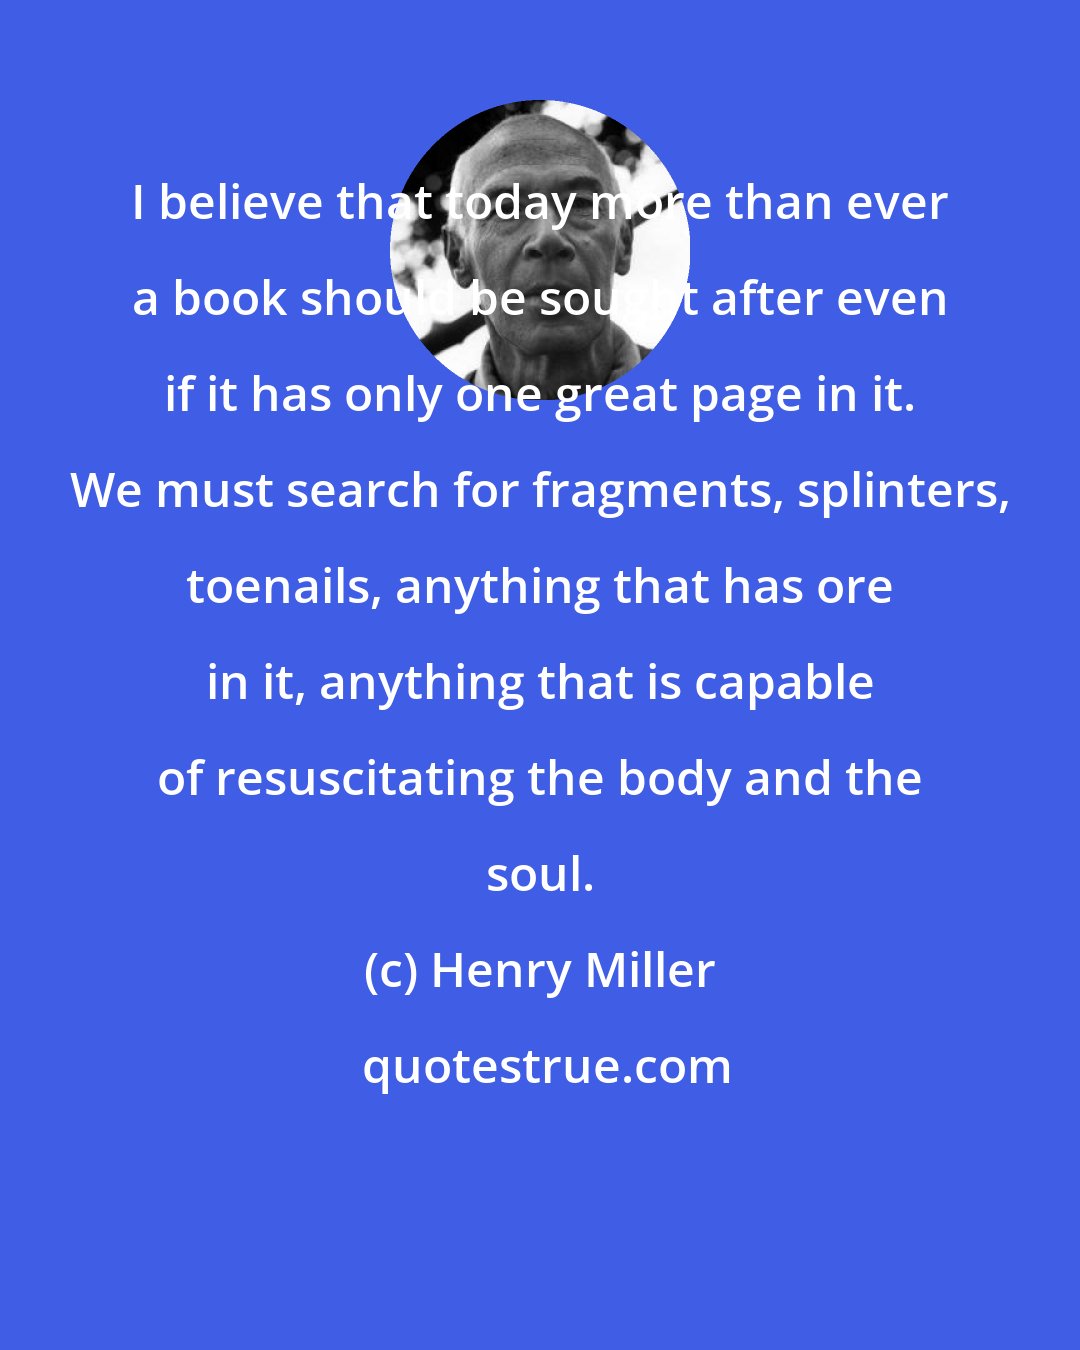 Henry Miller: I believe that today more than ever a book should be sought after even if it has only one great page in it. We must search for fragments, splinters, toenails, anything that has ore in it, anything that is capable of resuscitating the body and the soul.